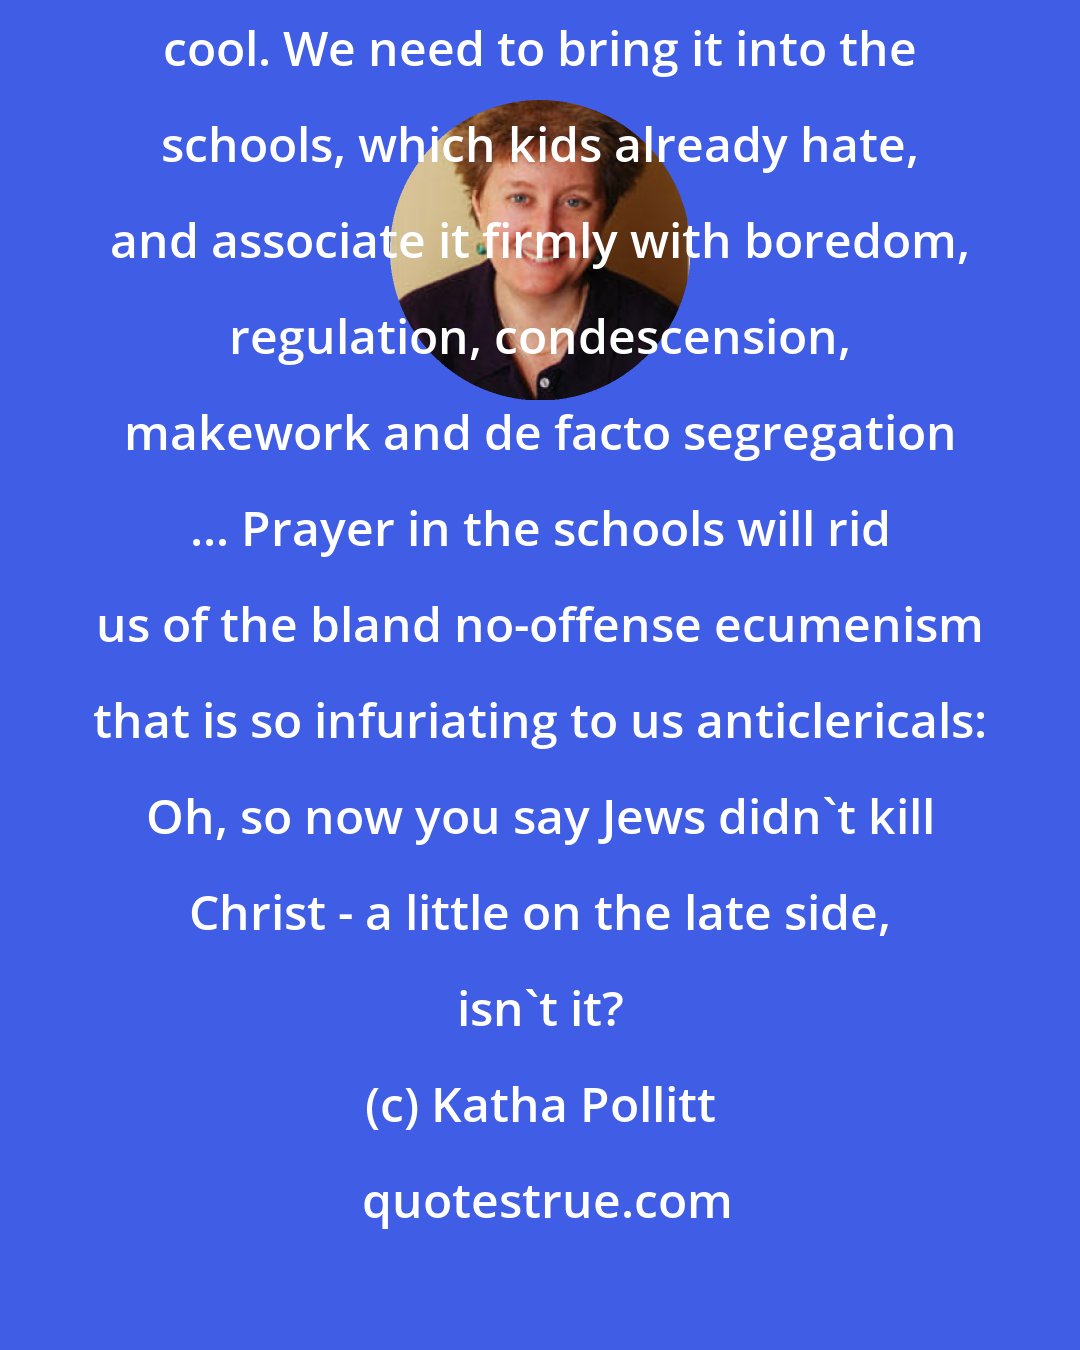 Katha Pollitt: Right now religion has the romantic aura of the forbidden - Christ is cool. We need to bring it into the schools, which kids already hate, and associate it firmly with boredom, regulation, condescension, makework and de facto segregation ... Prayer in the schools will rid us of the bland no-offense ecumenism that is so infuriating to us anticlericals: Oh, so now you say Jews didn't kill Christ - a little on the late side, isn't it?